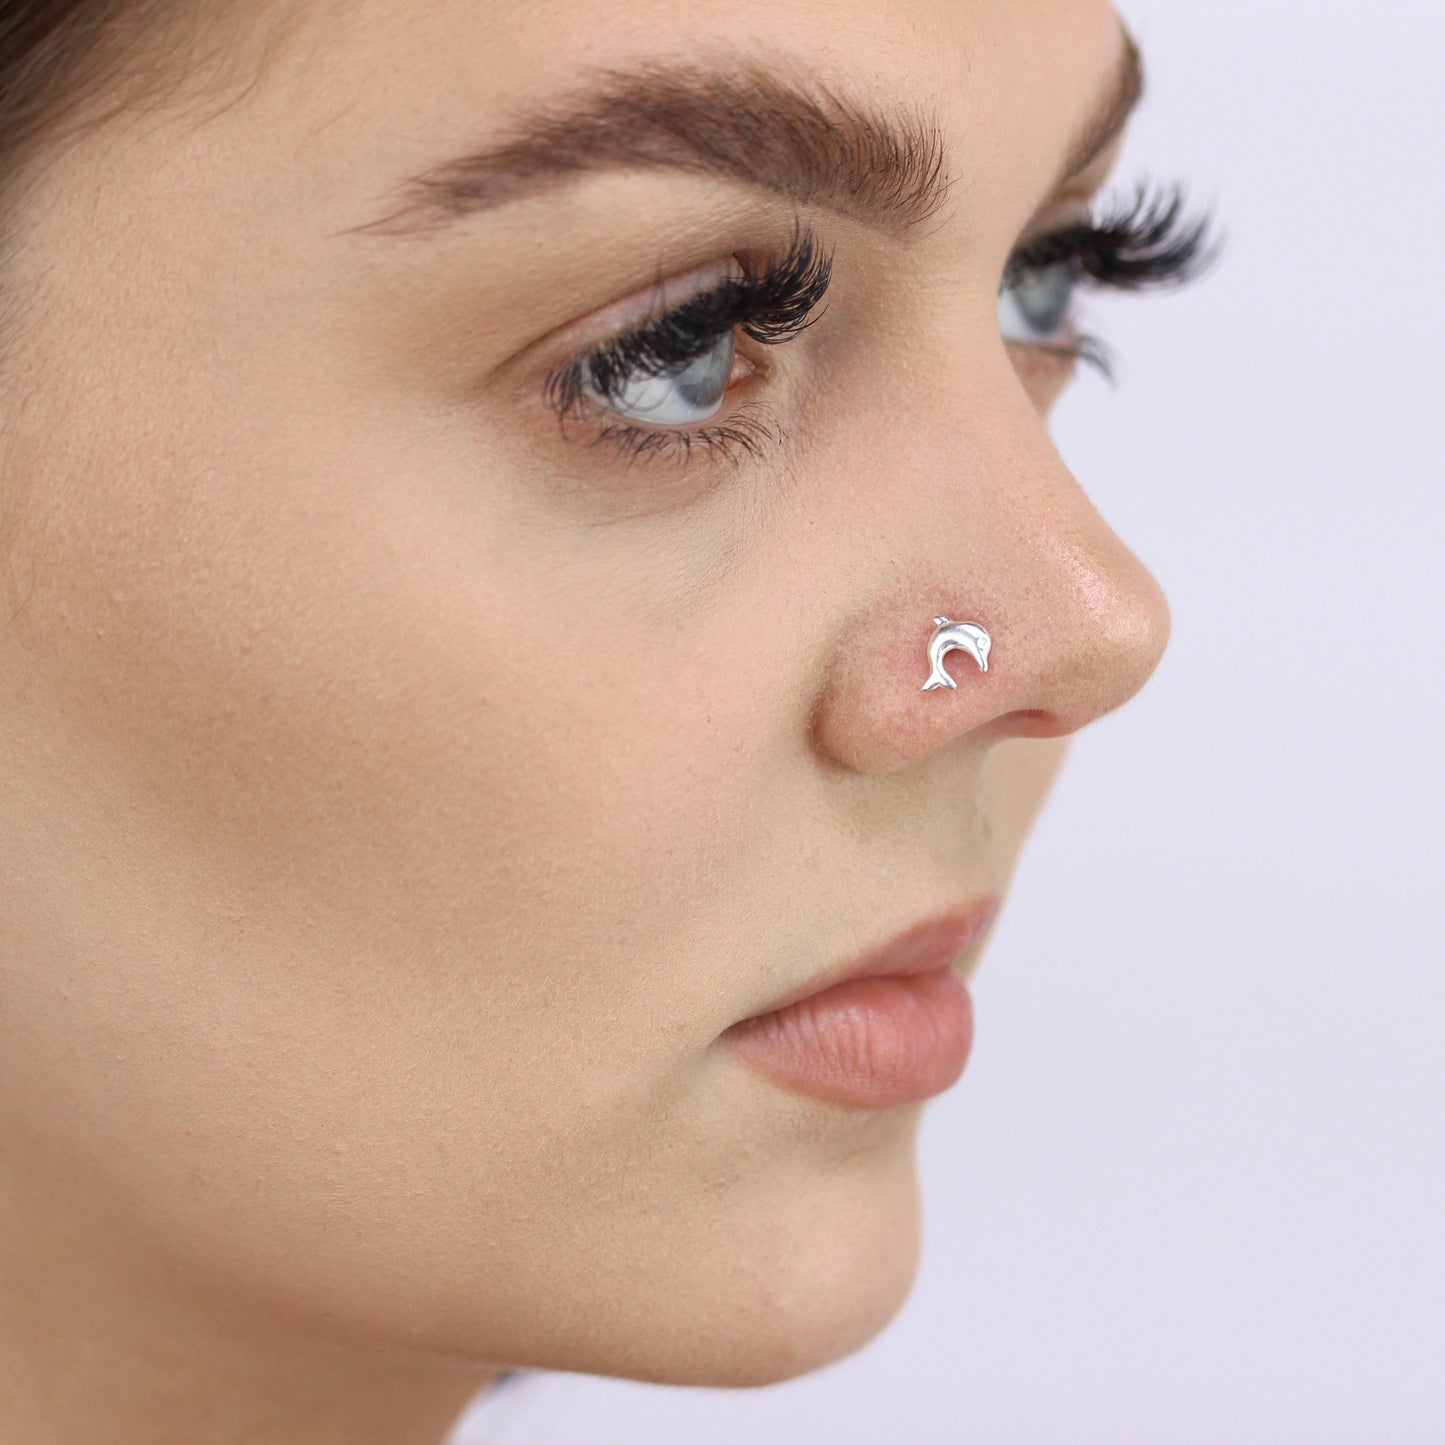 Sterling Silver Dolphin L-Shaped Nose Stud